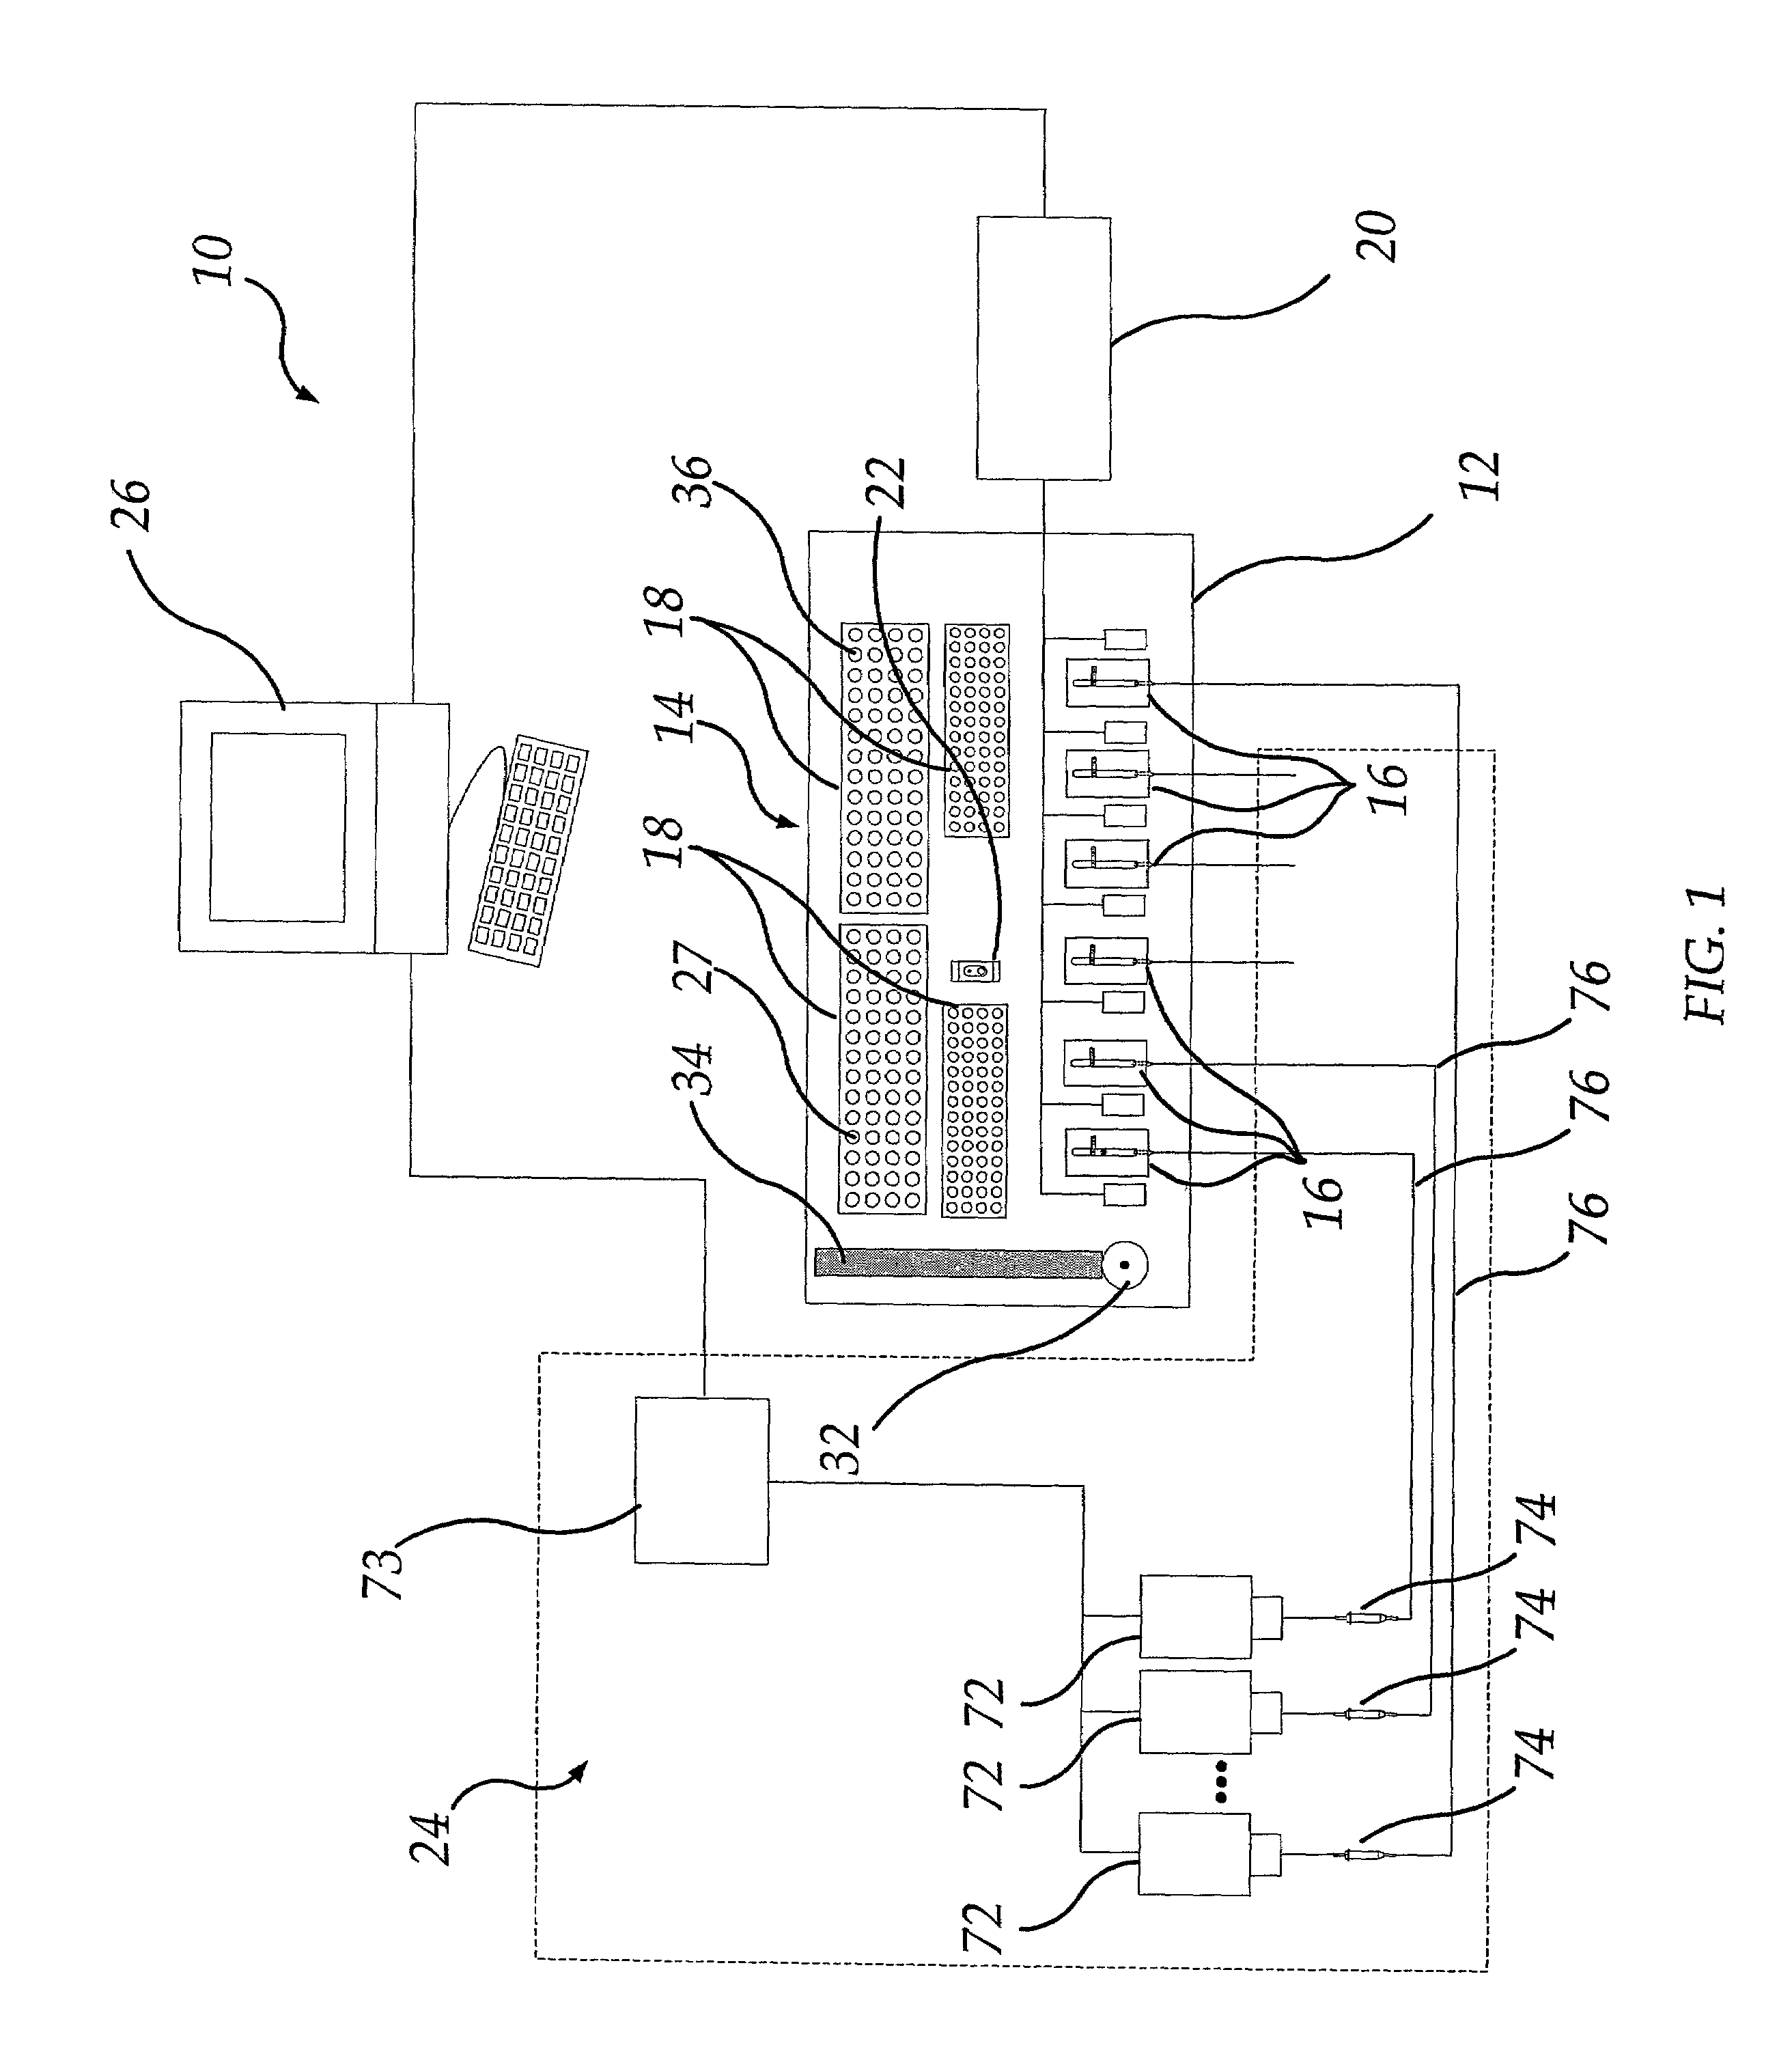 Apparatus and method for electrophysiological testing